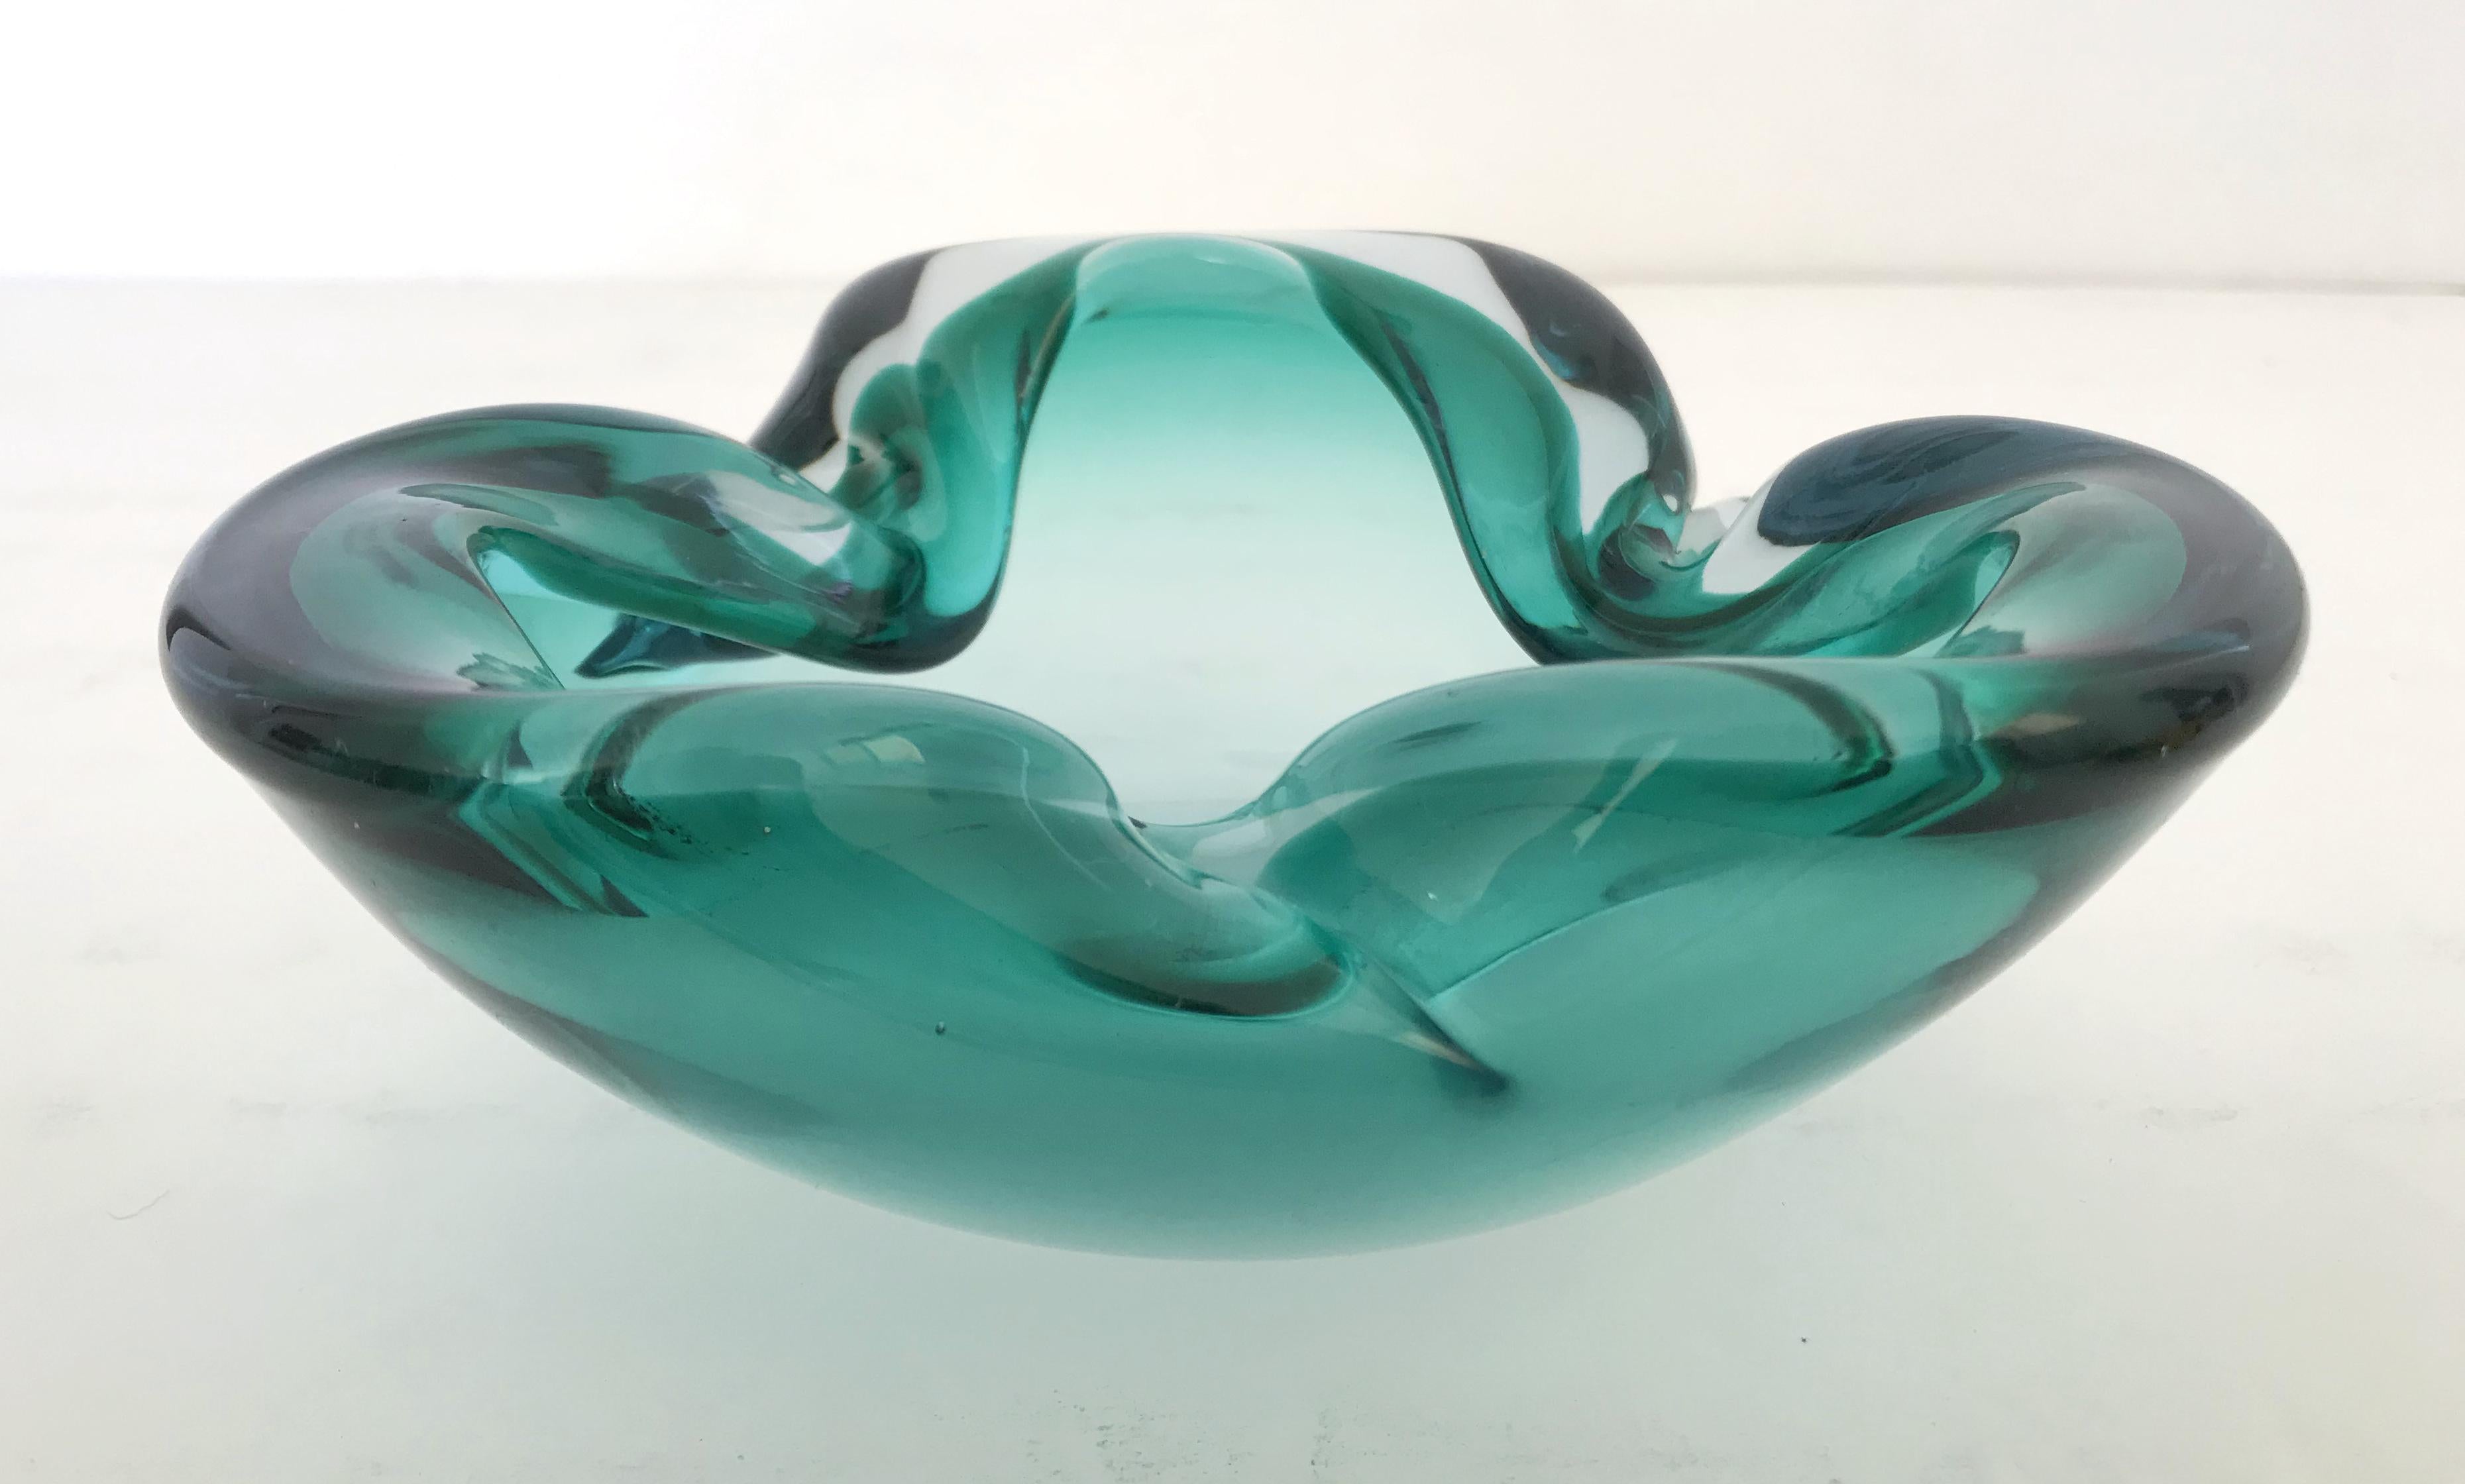 Vintage Italian green Murano glass ashtray or bowl / Made in Italy, circa 1960s
Measures: diameter 6 inches, height 2.5 inches
1 in stock in Palm Springs ON 50% OFF SALE for $449 !!
Order Reference #: FABIOLTD G168
This piece makes for great and